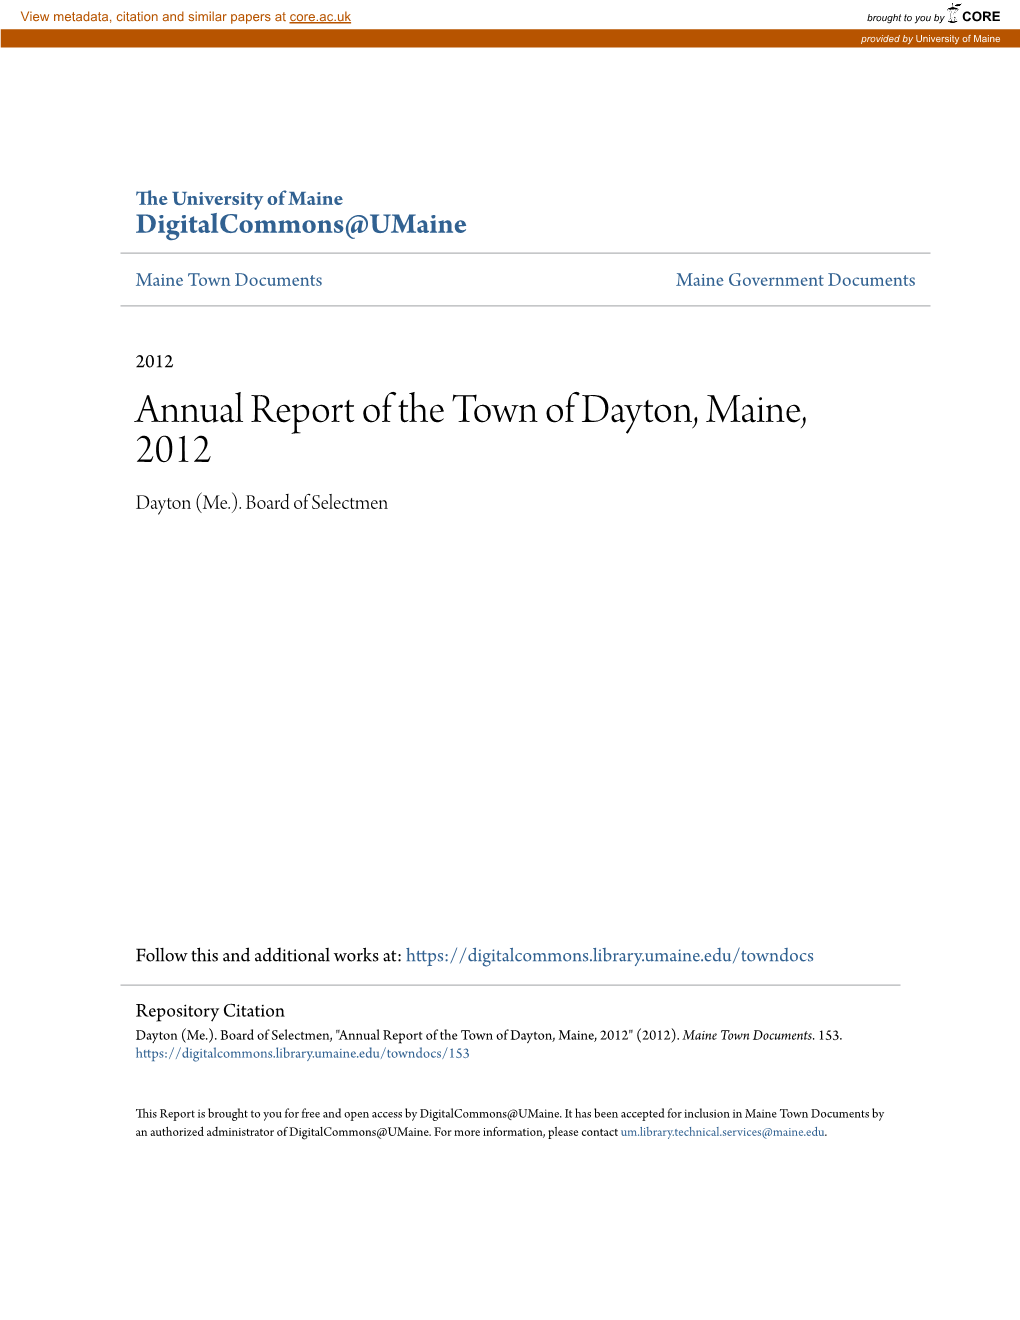 Annual Report of the Town of Dayton, Maine, 2012 Dayton (Me.)